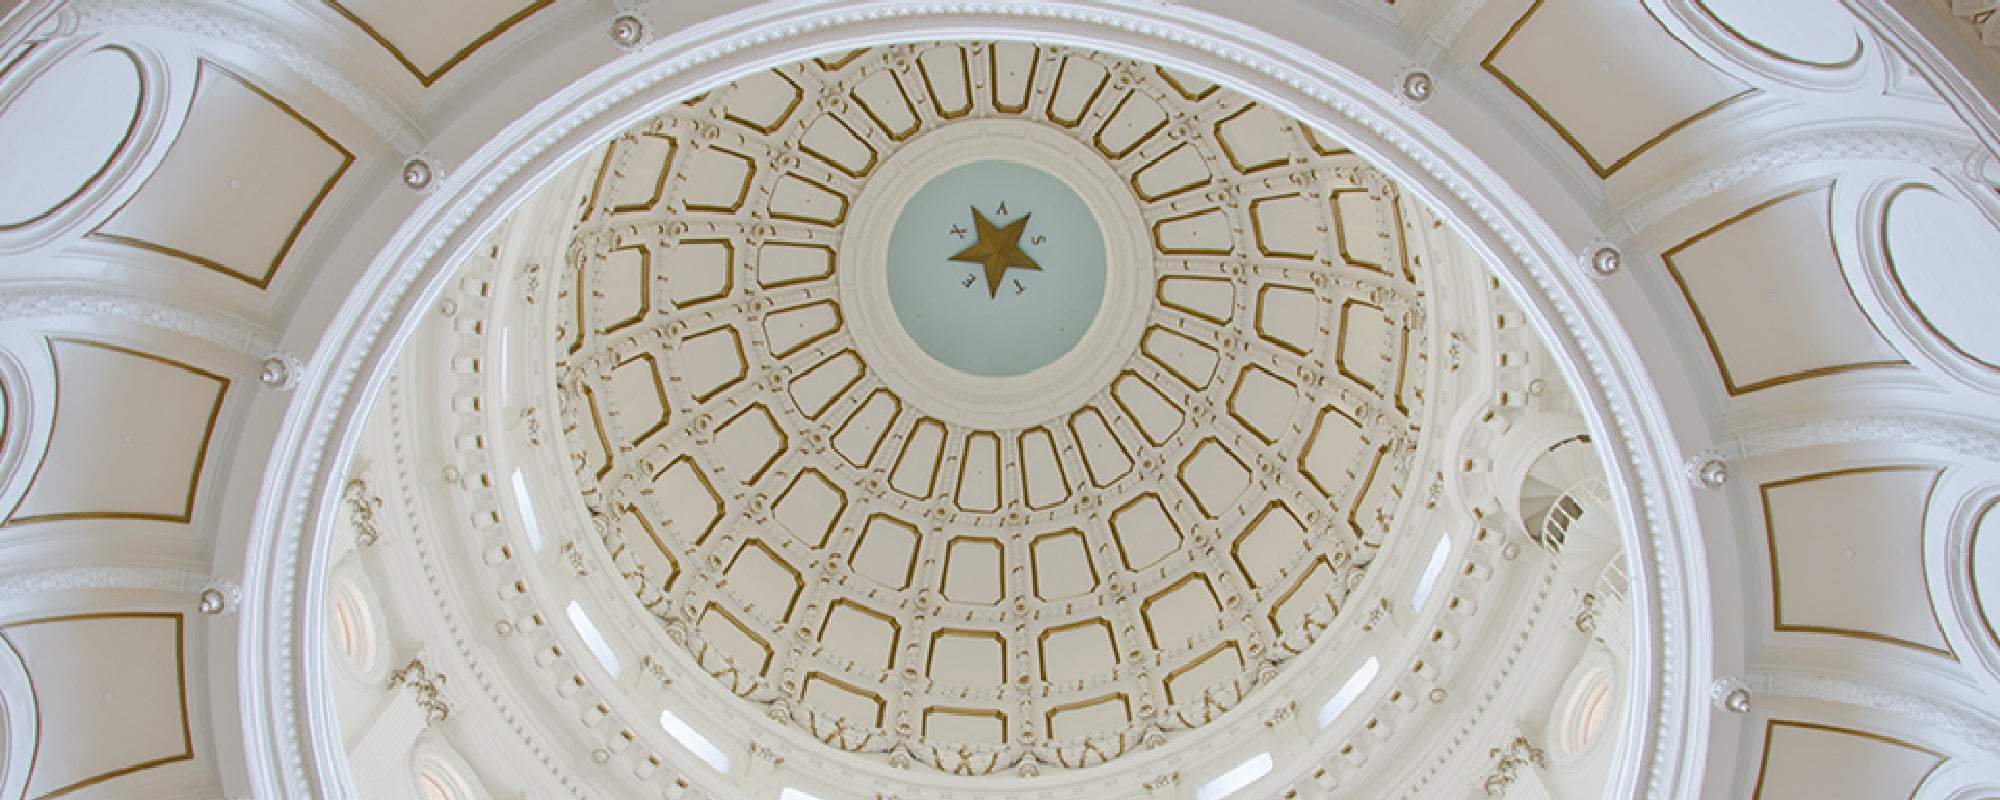 Inside the Capitol dome